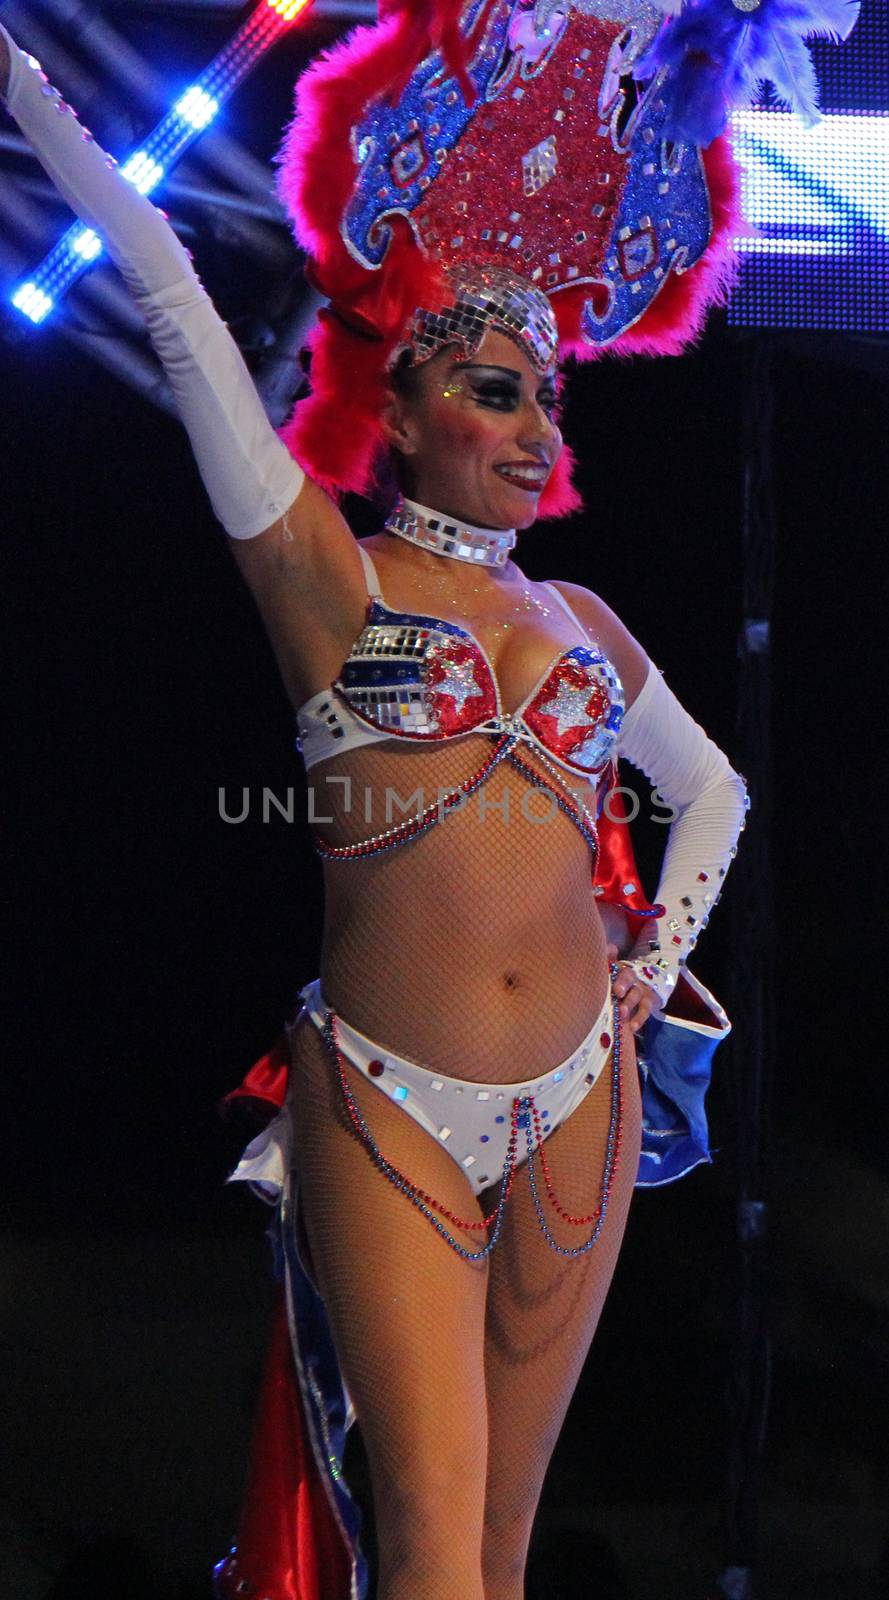 An entertainer performing on stage in Playa del Carmen, Mexico
08 Feb 2013
No model release
Editorial only